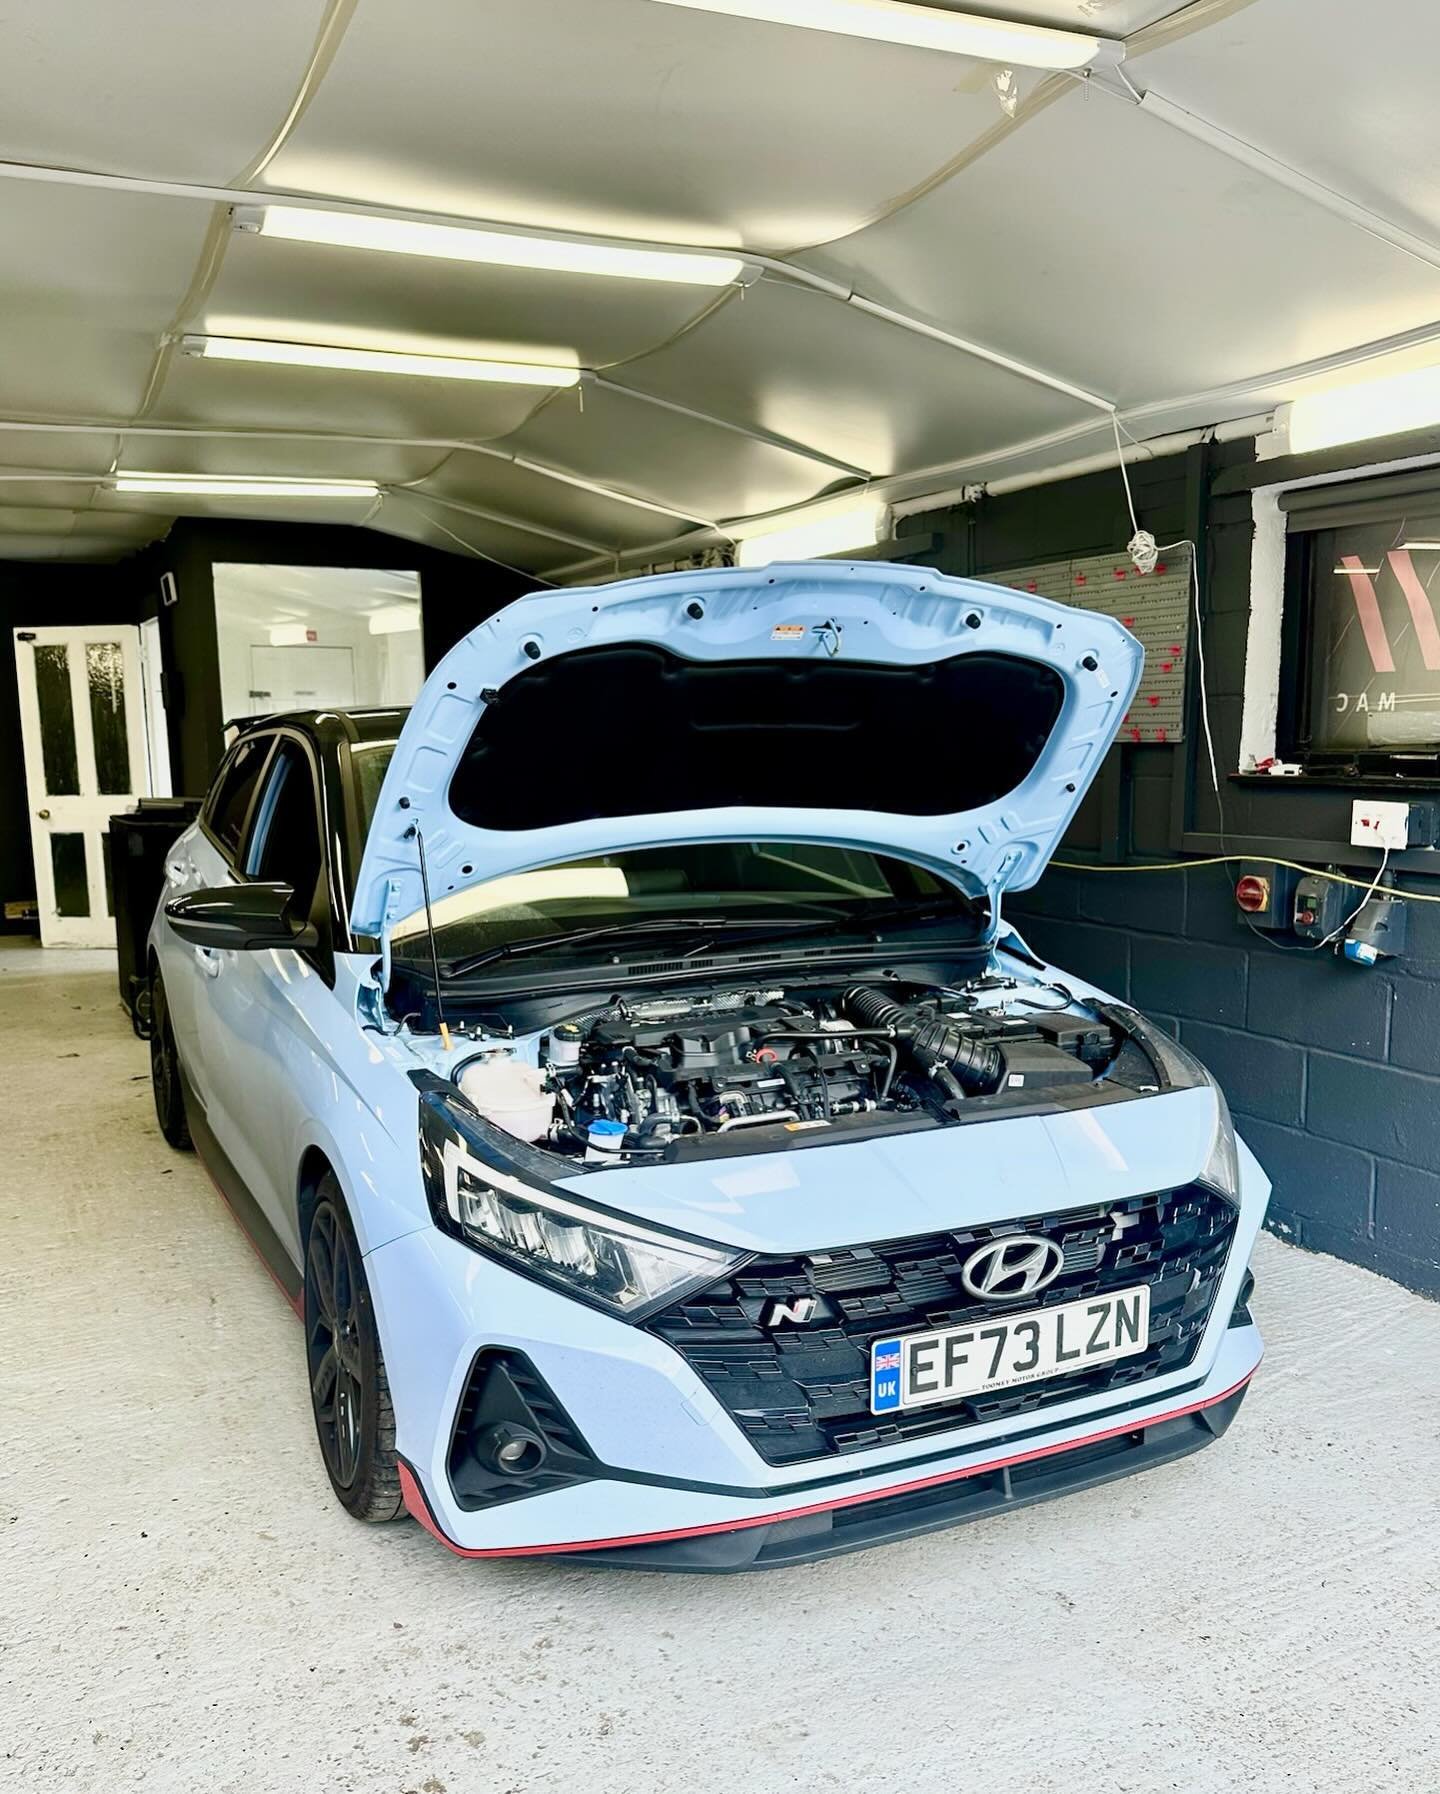 Stunning Hyundai I20N in the workshop for a health check and diagnostic session. Unfortunately this one still has a locked ECU and cannot be tuned 📈

Own a Hyundai and looking for more power? Get in contact to find out what we can do for you ☑️

➖➖➖